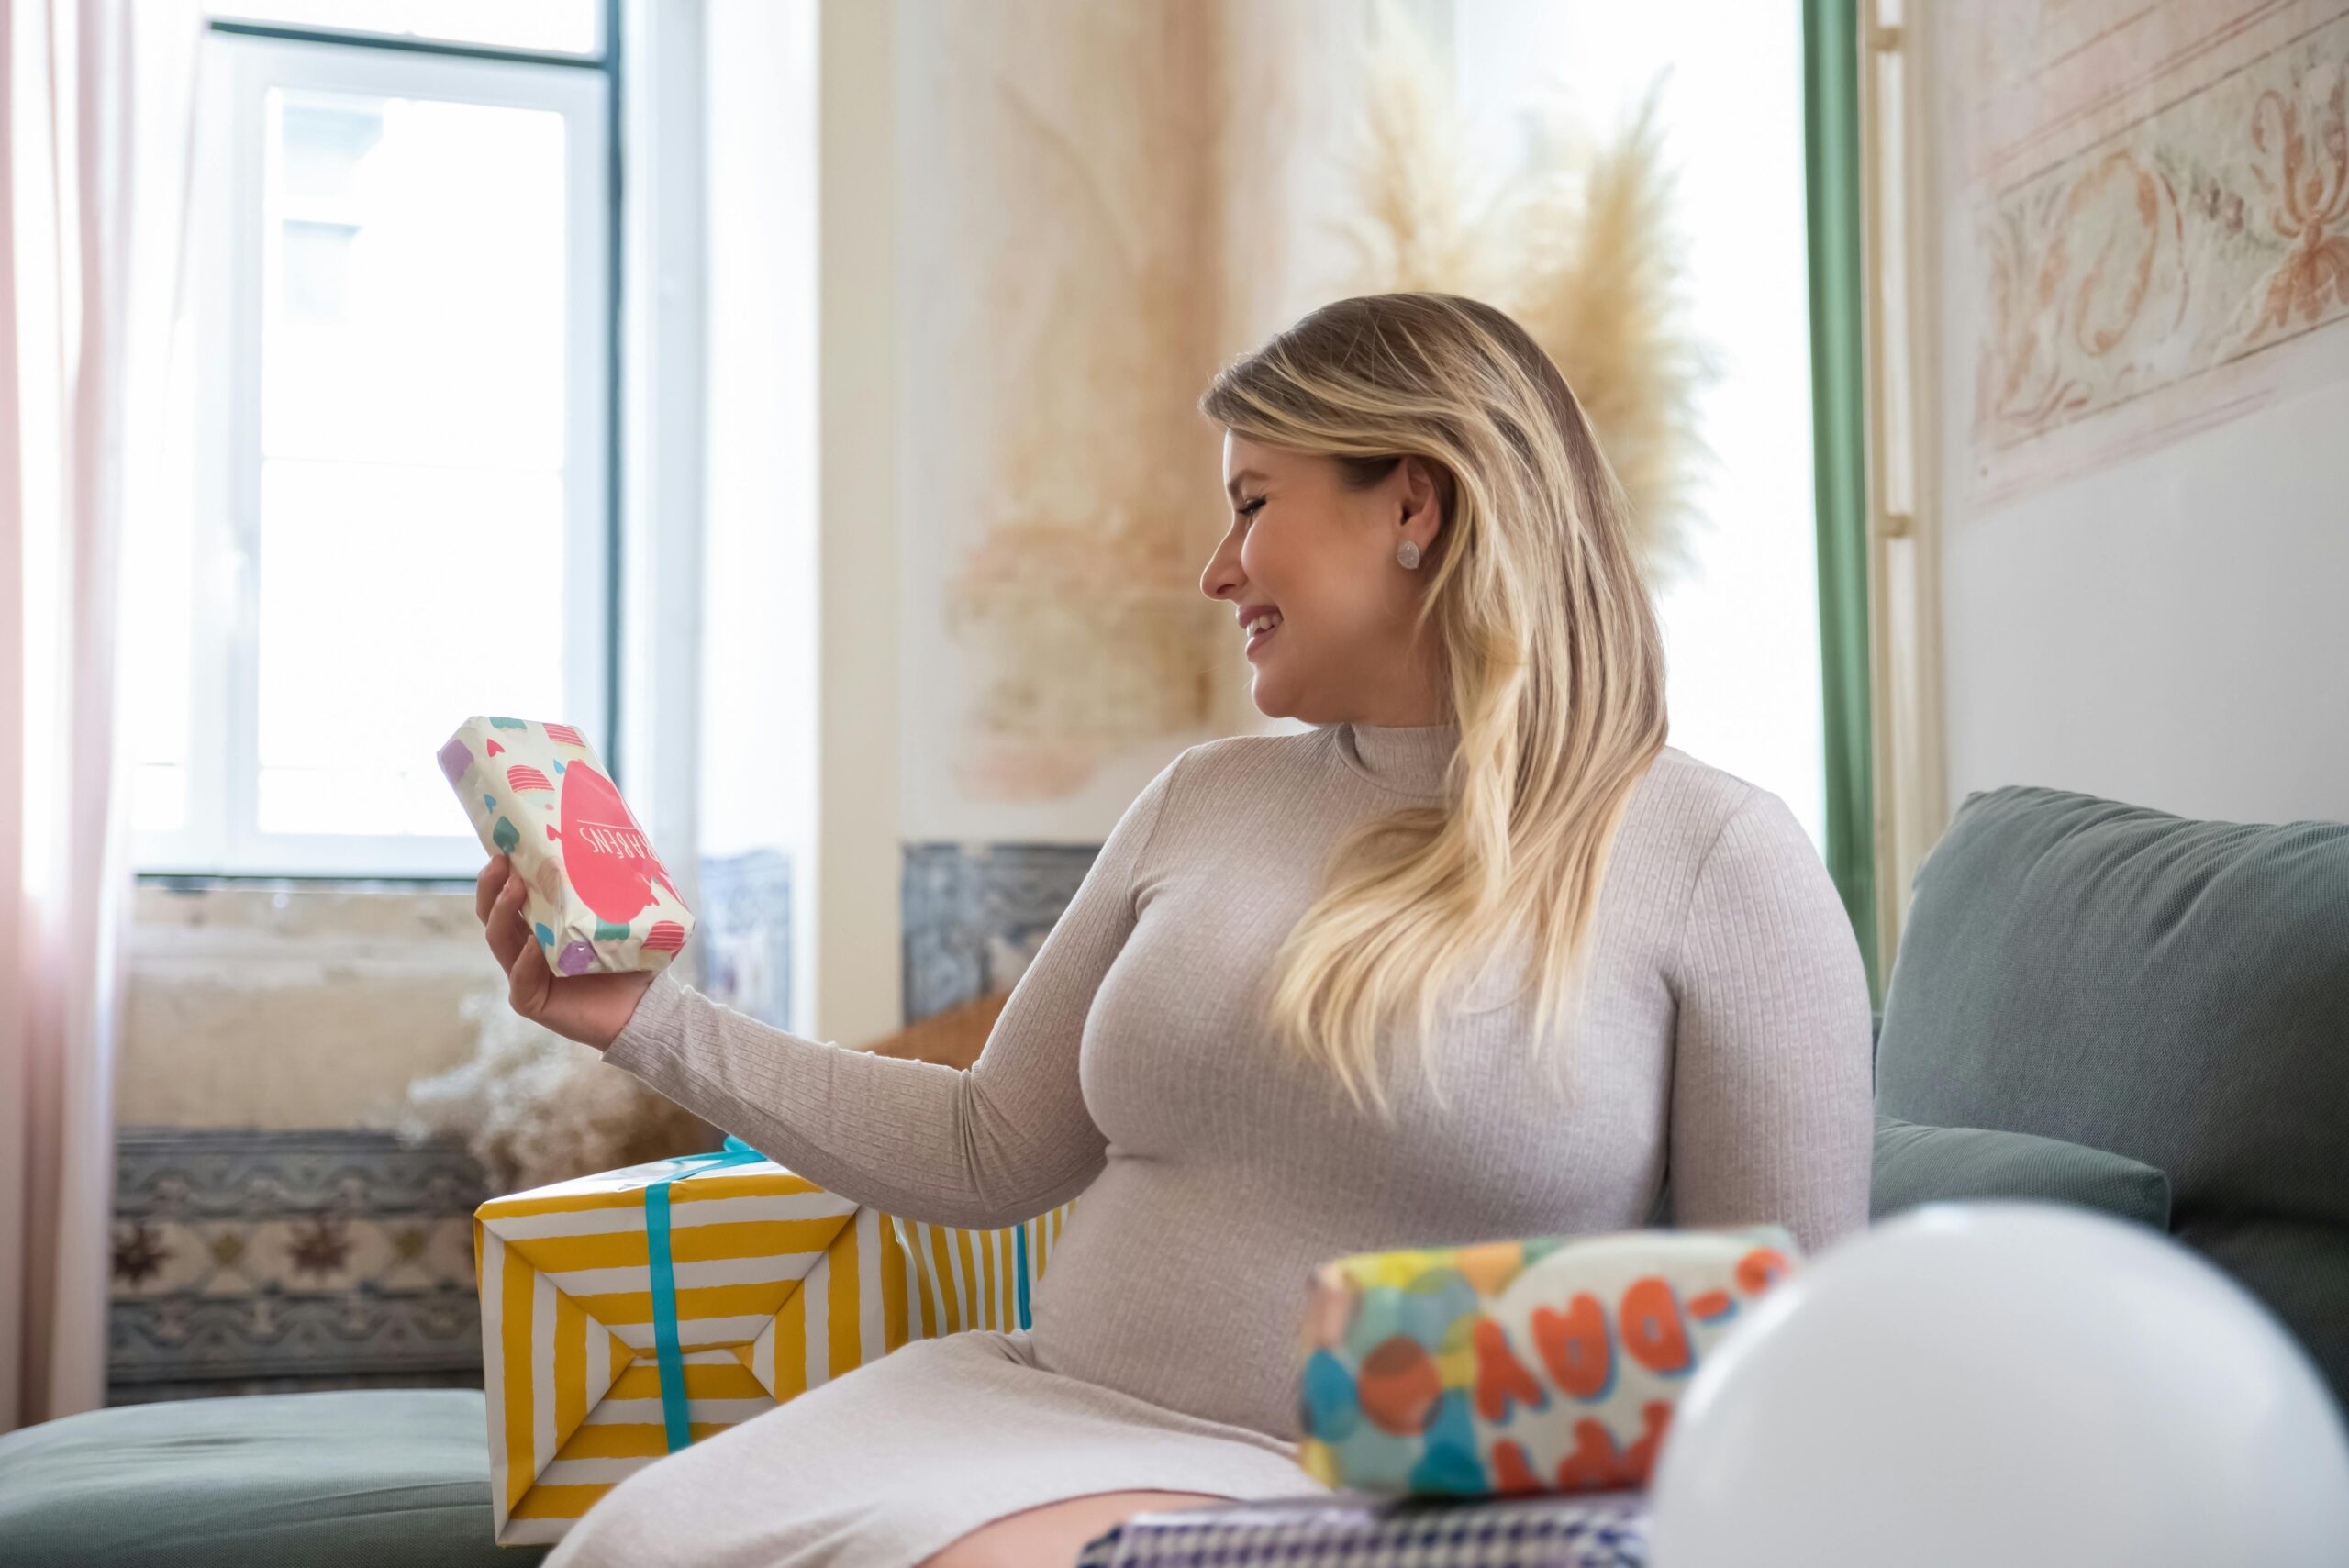 10 Thoughtful Gift Ideas for Pregnant Moms